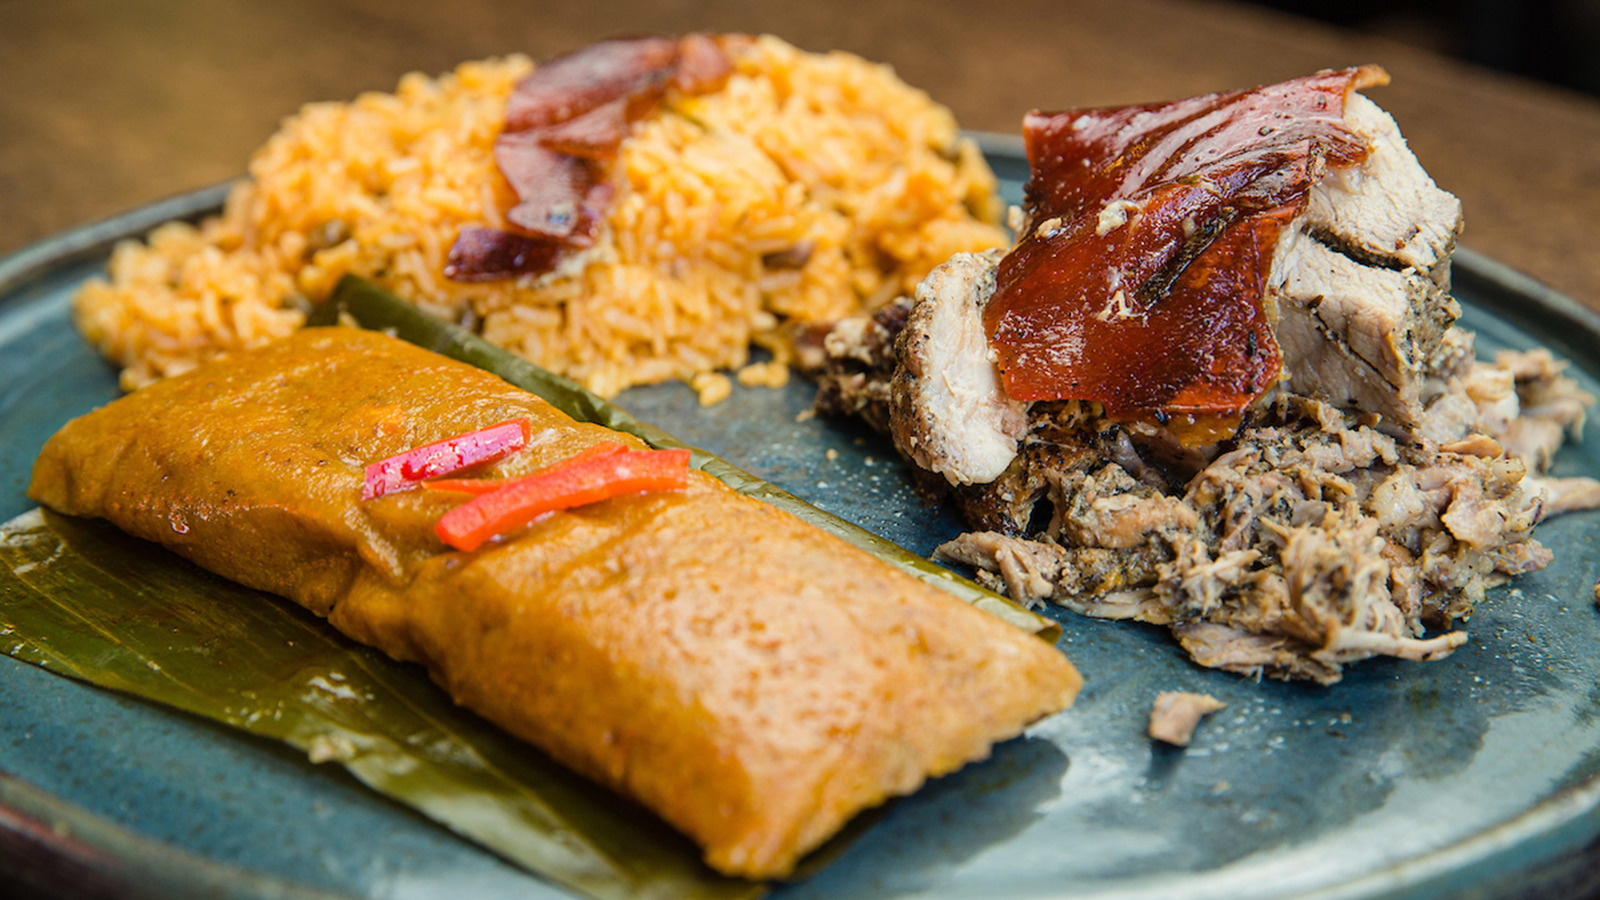 Pasteles to Perfection: Making A Puerto Rican Christmas Dish